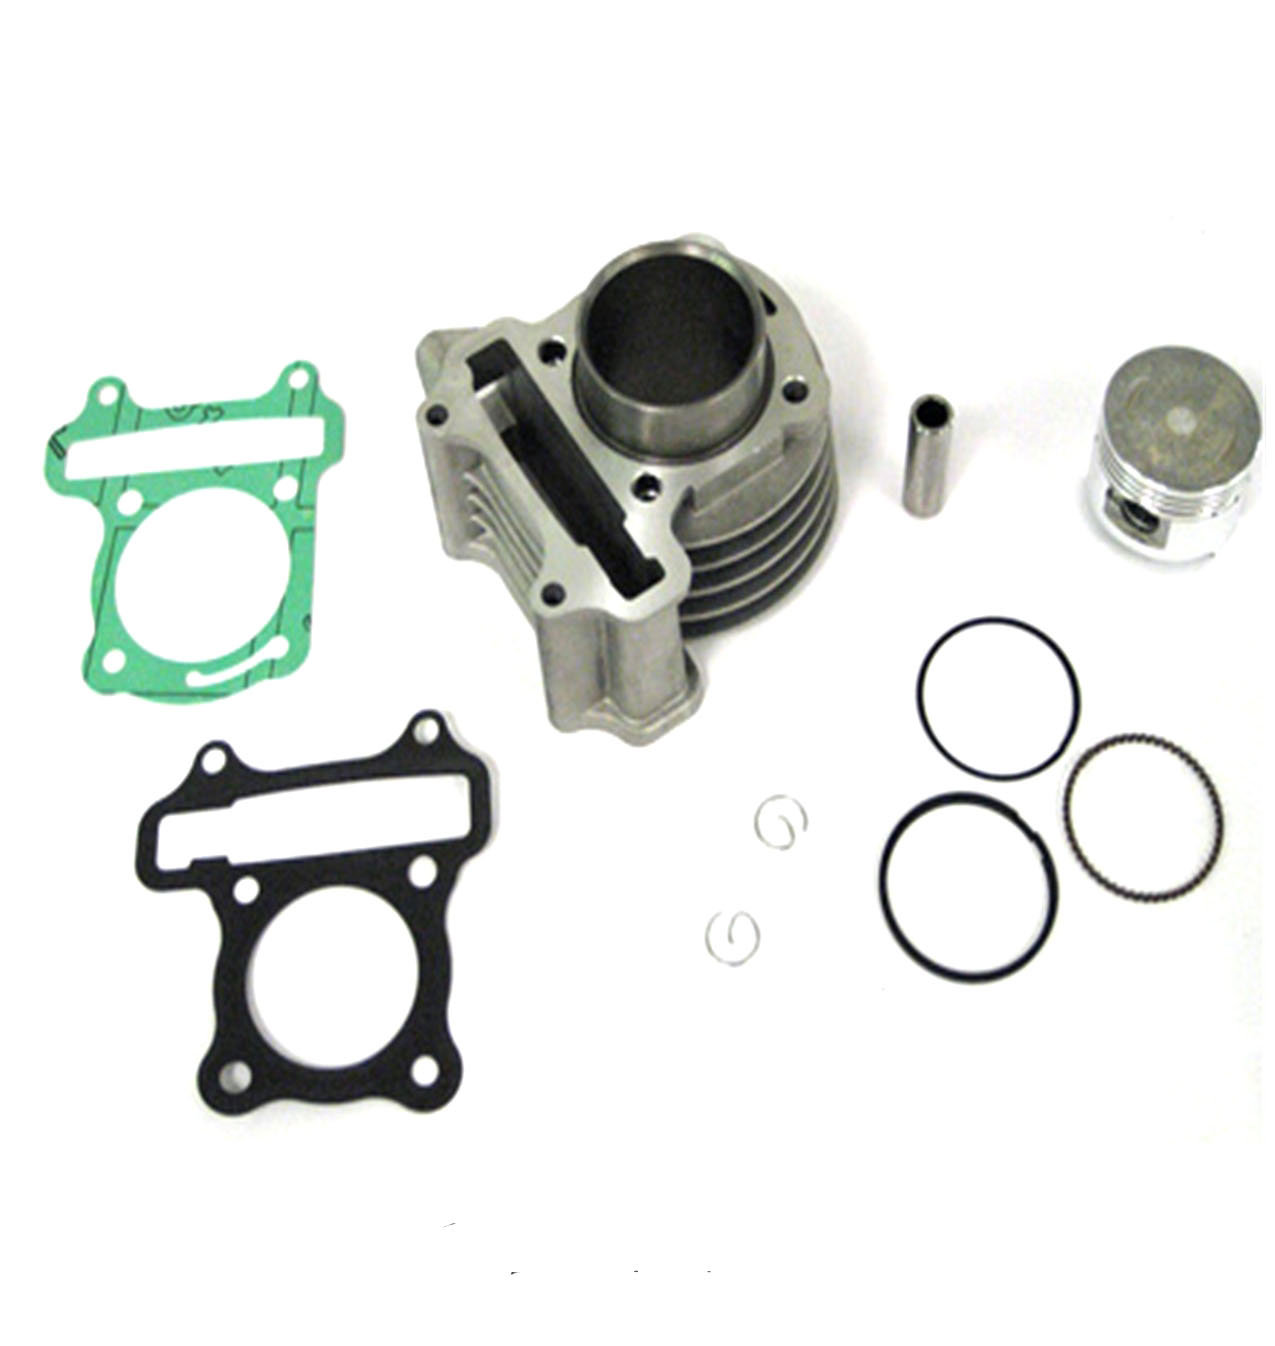 60cc (High Performance) Cylinder Piston Top End Kit For GY6-50 QMB139 Chinese Scooter Motors. Bore=44mm - Click Image to Close